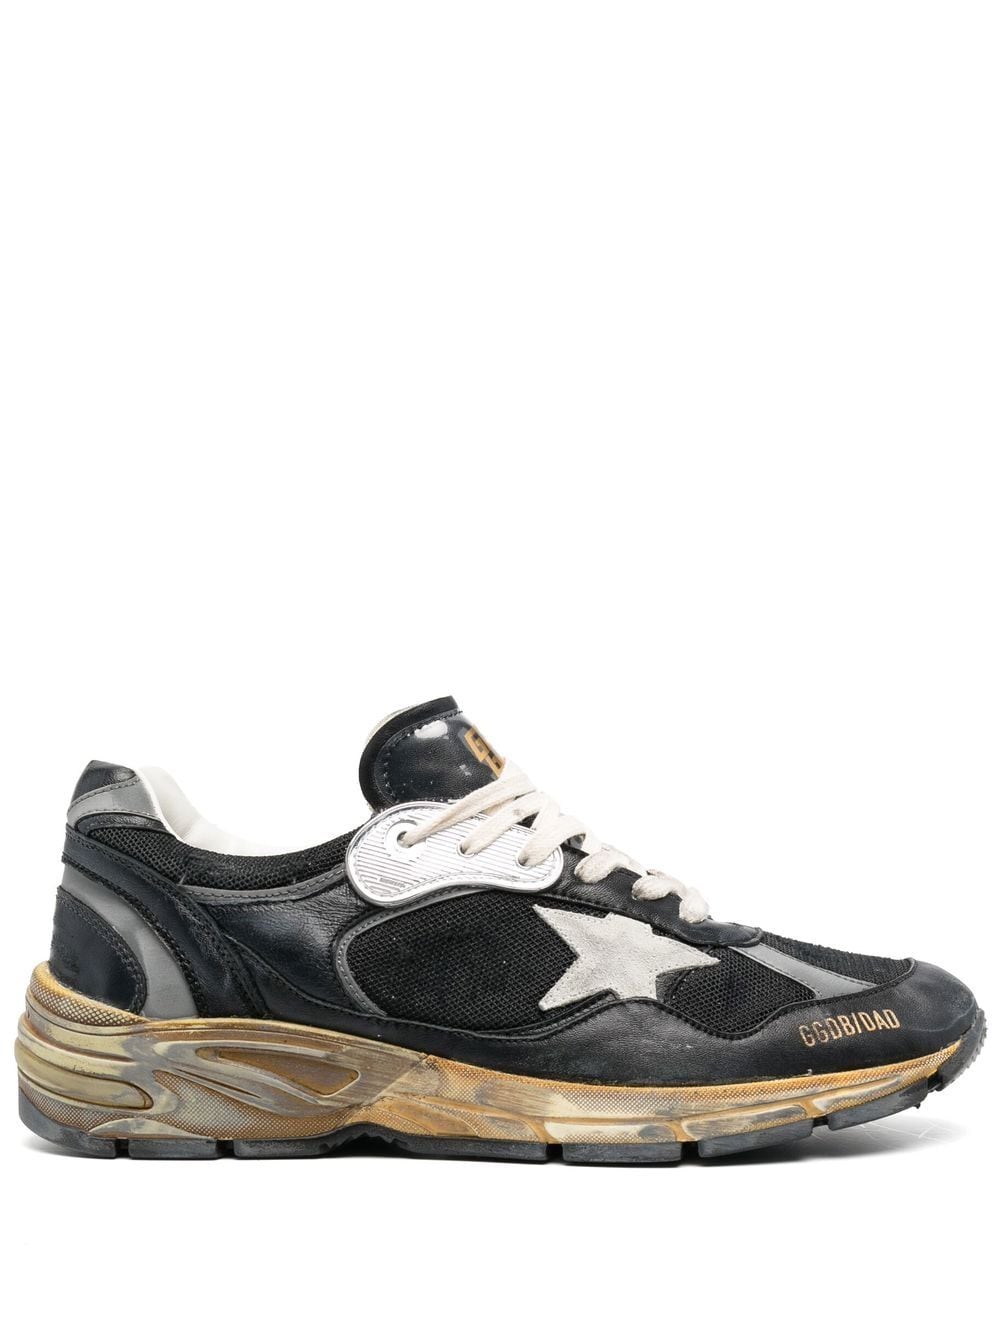 Golden Goose star-patch lace-up Sneakers - Farfetch